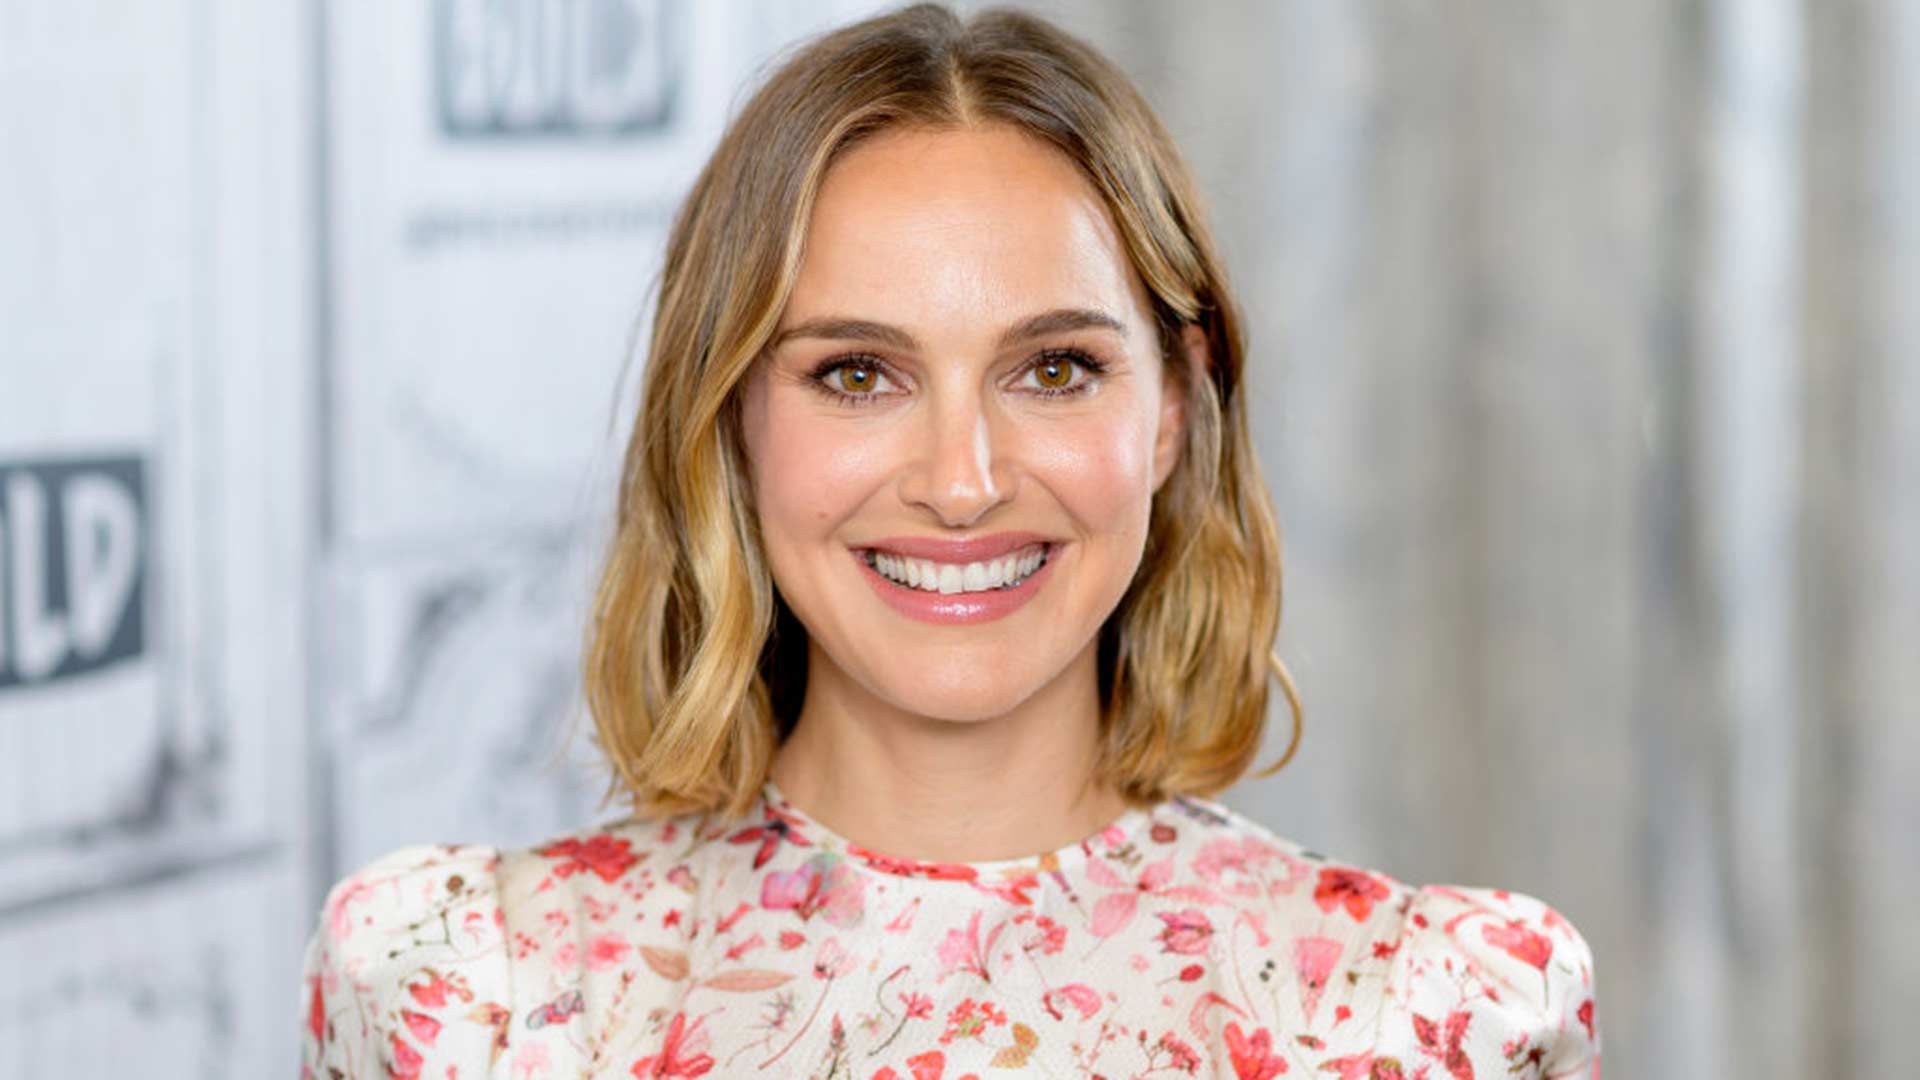 Natalie Portman smiling in a white and pink floral dress